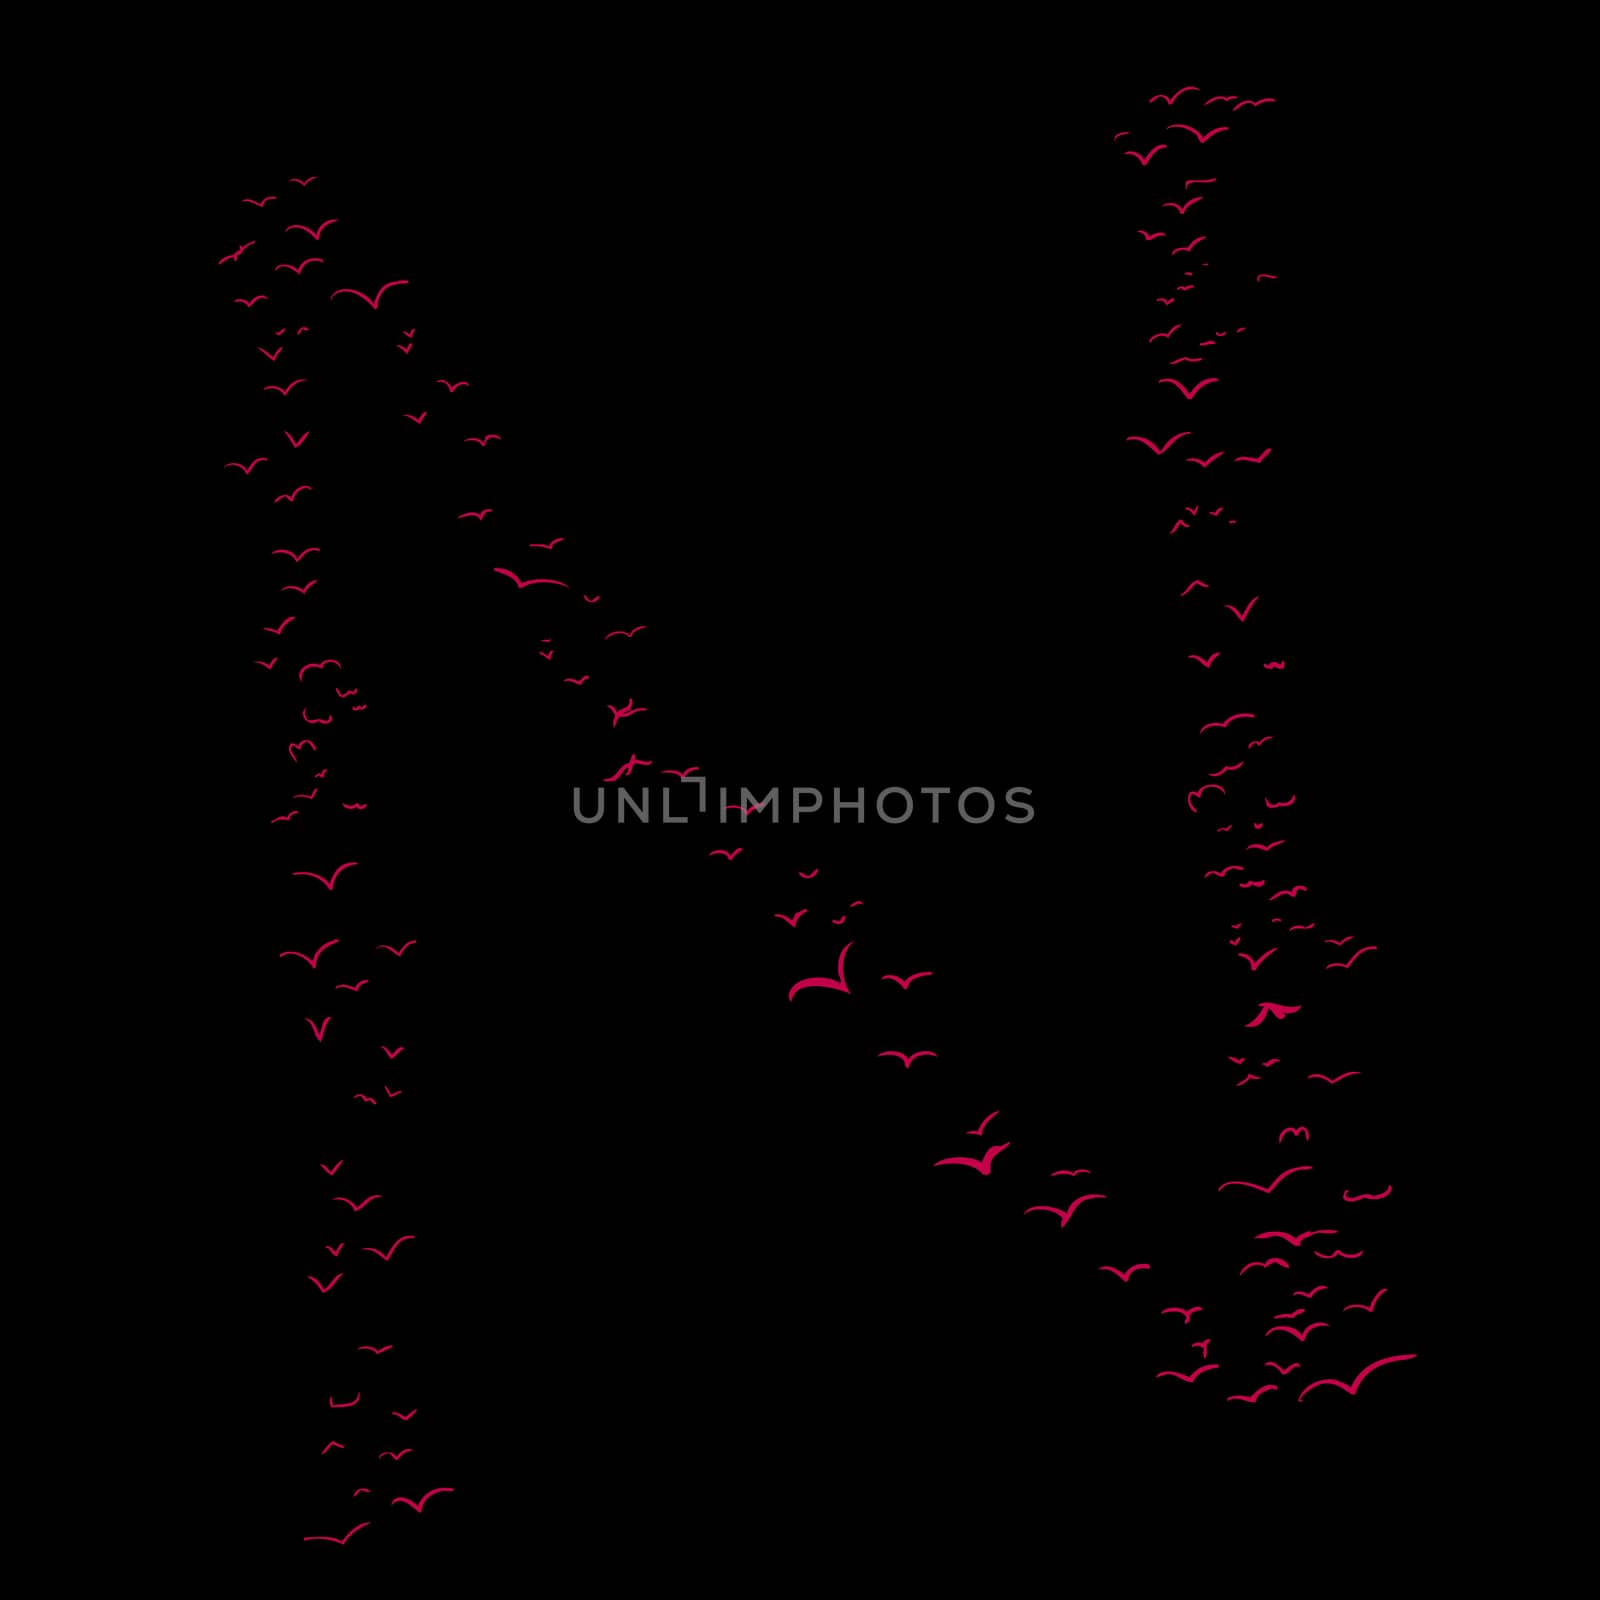 Red flock of birds in the shape of the letter n